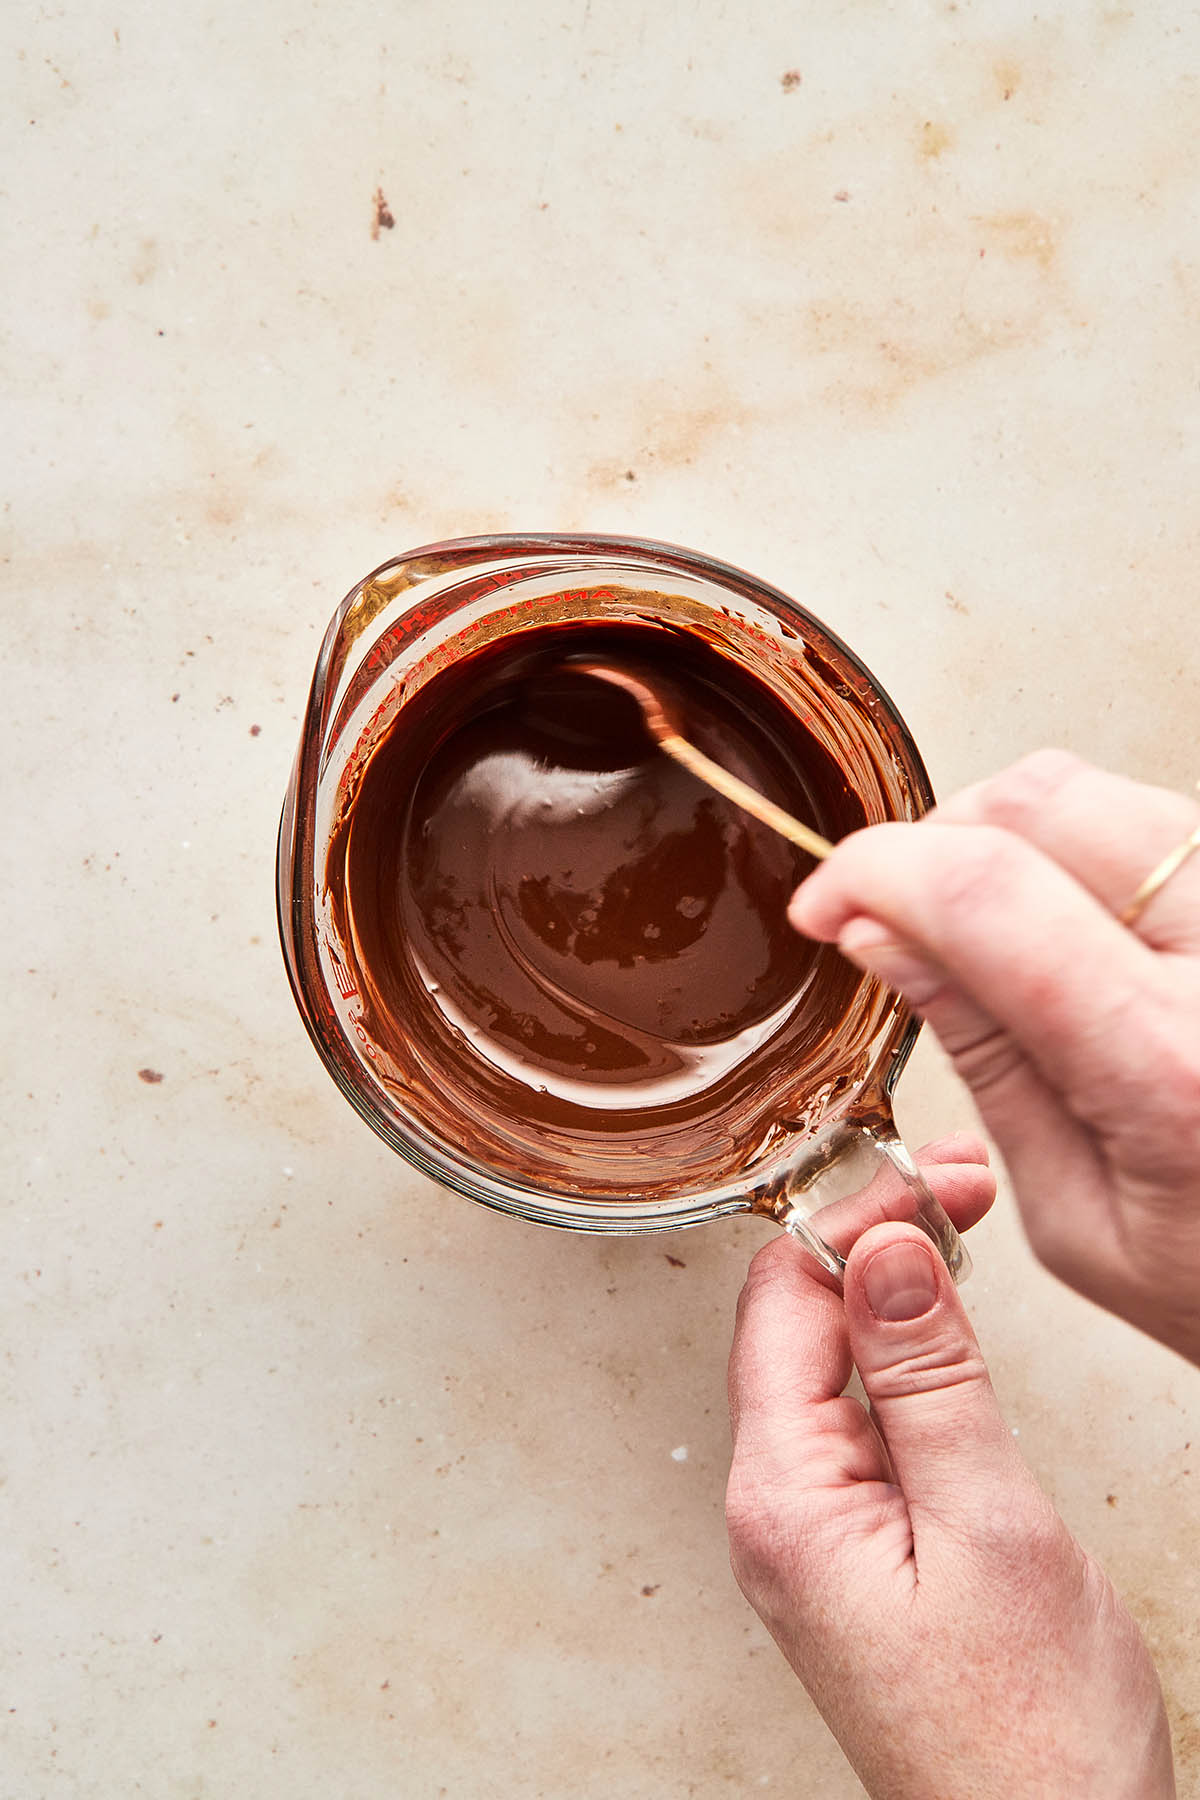 A hand stirring melted chocolate in a glass measuring cup.